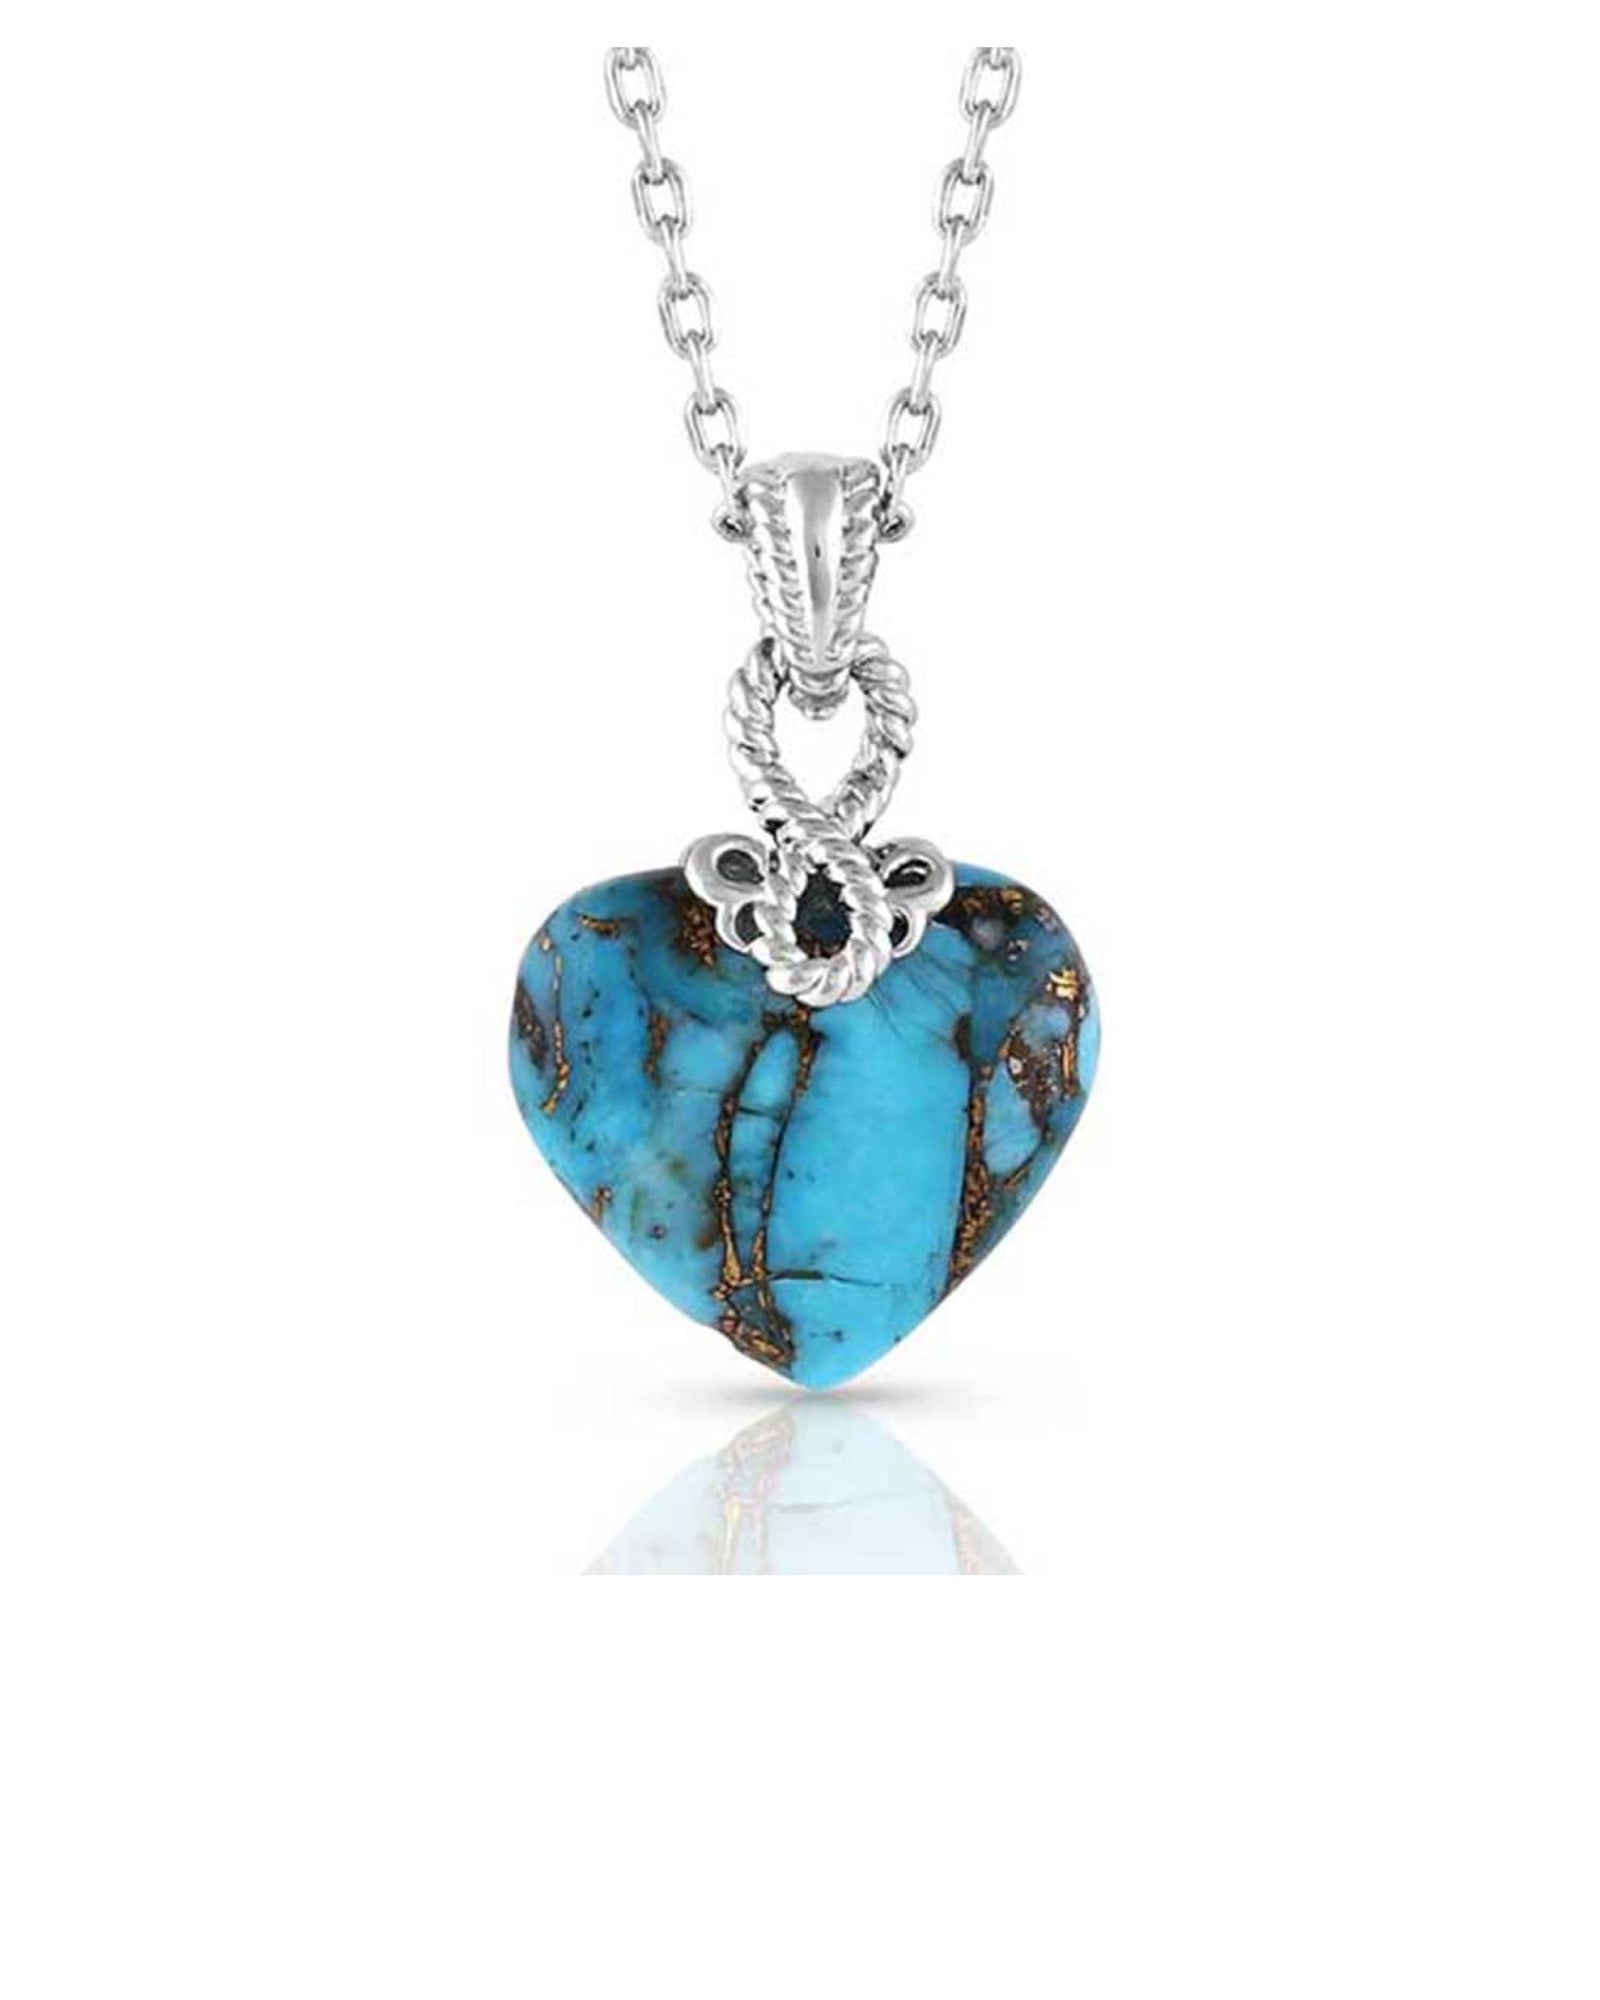 Untamable Heart of Stone Necklace